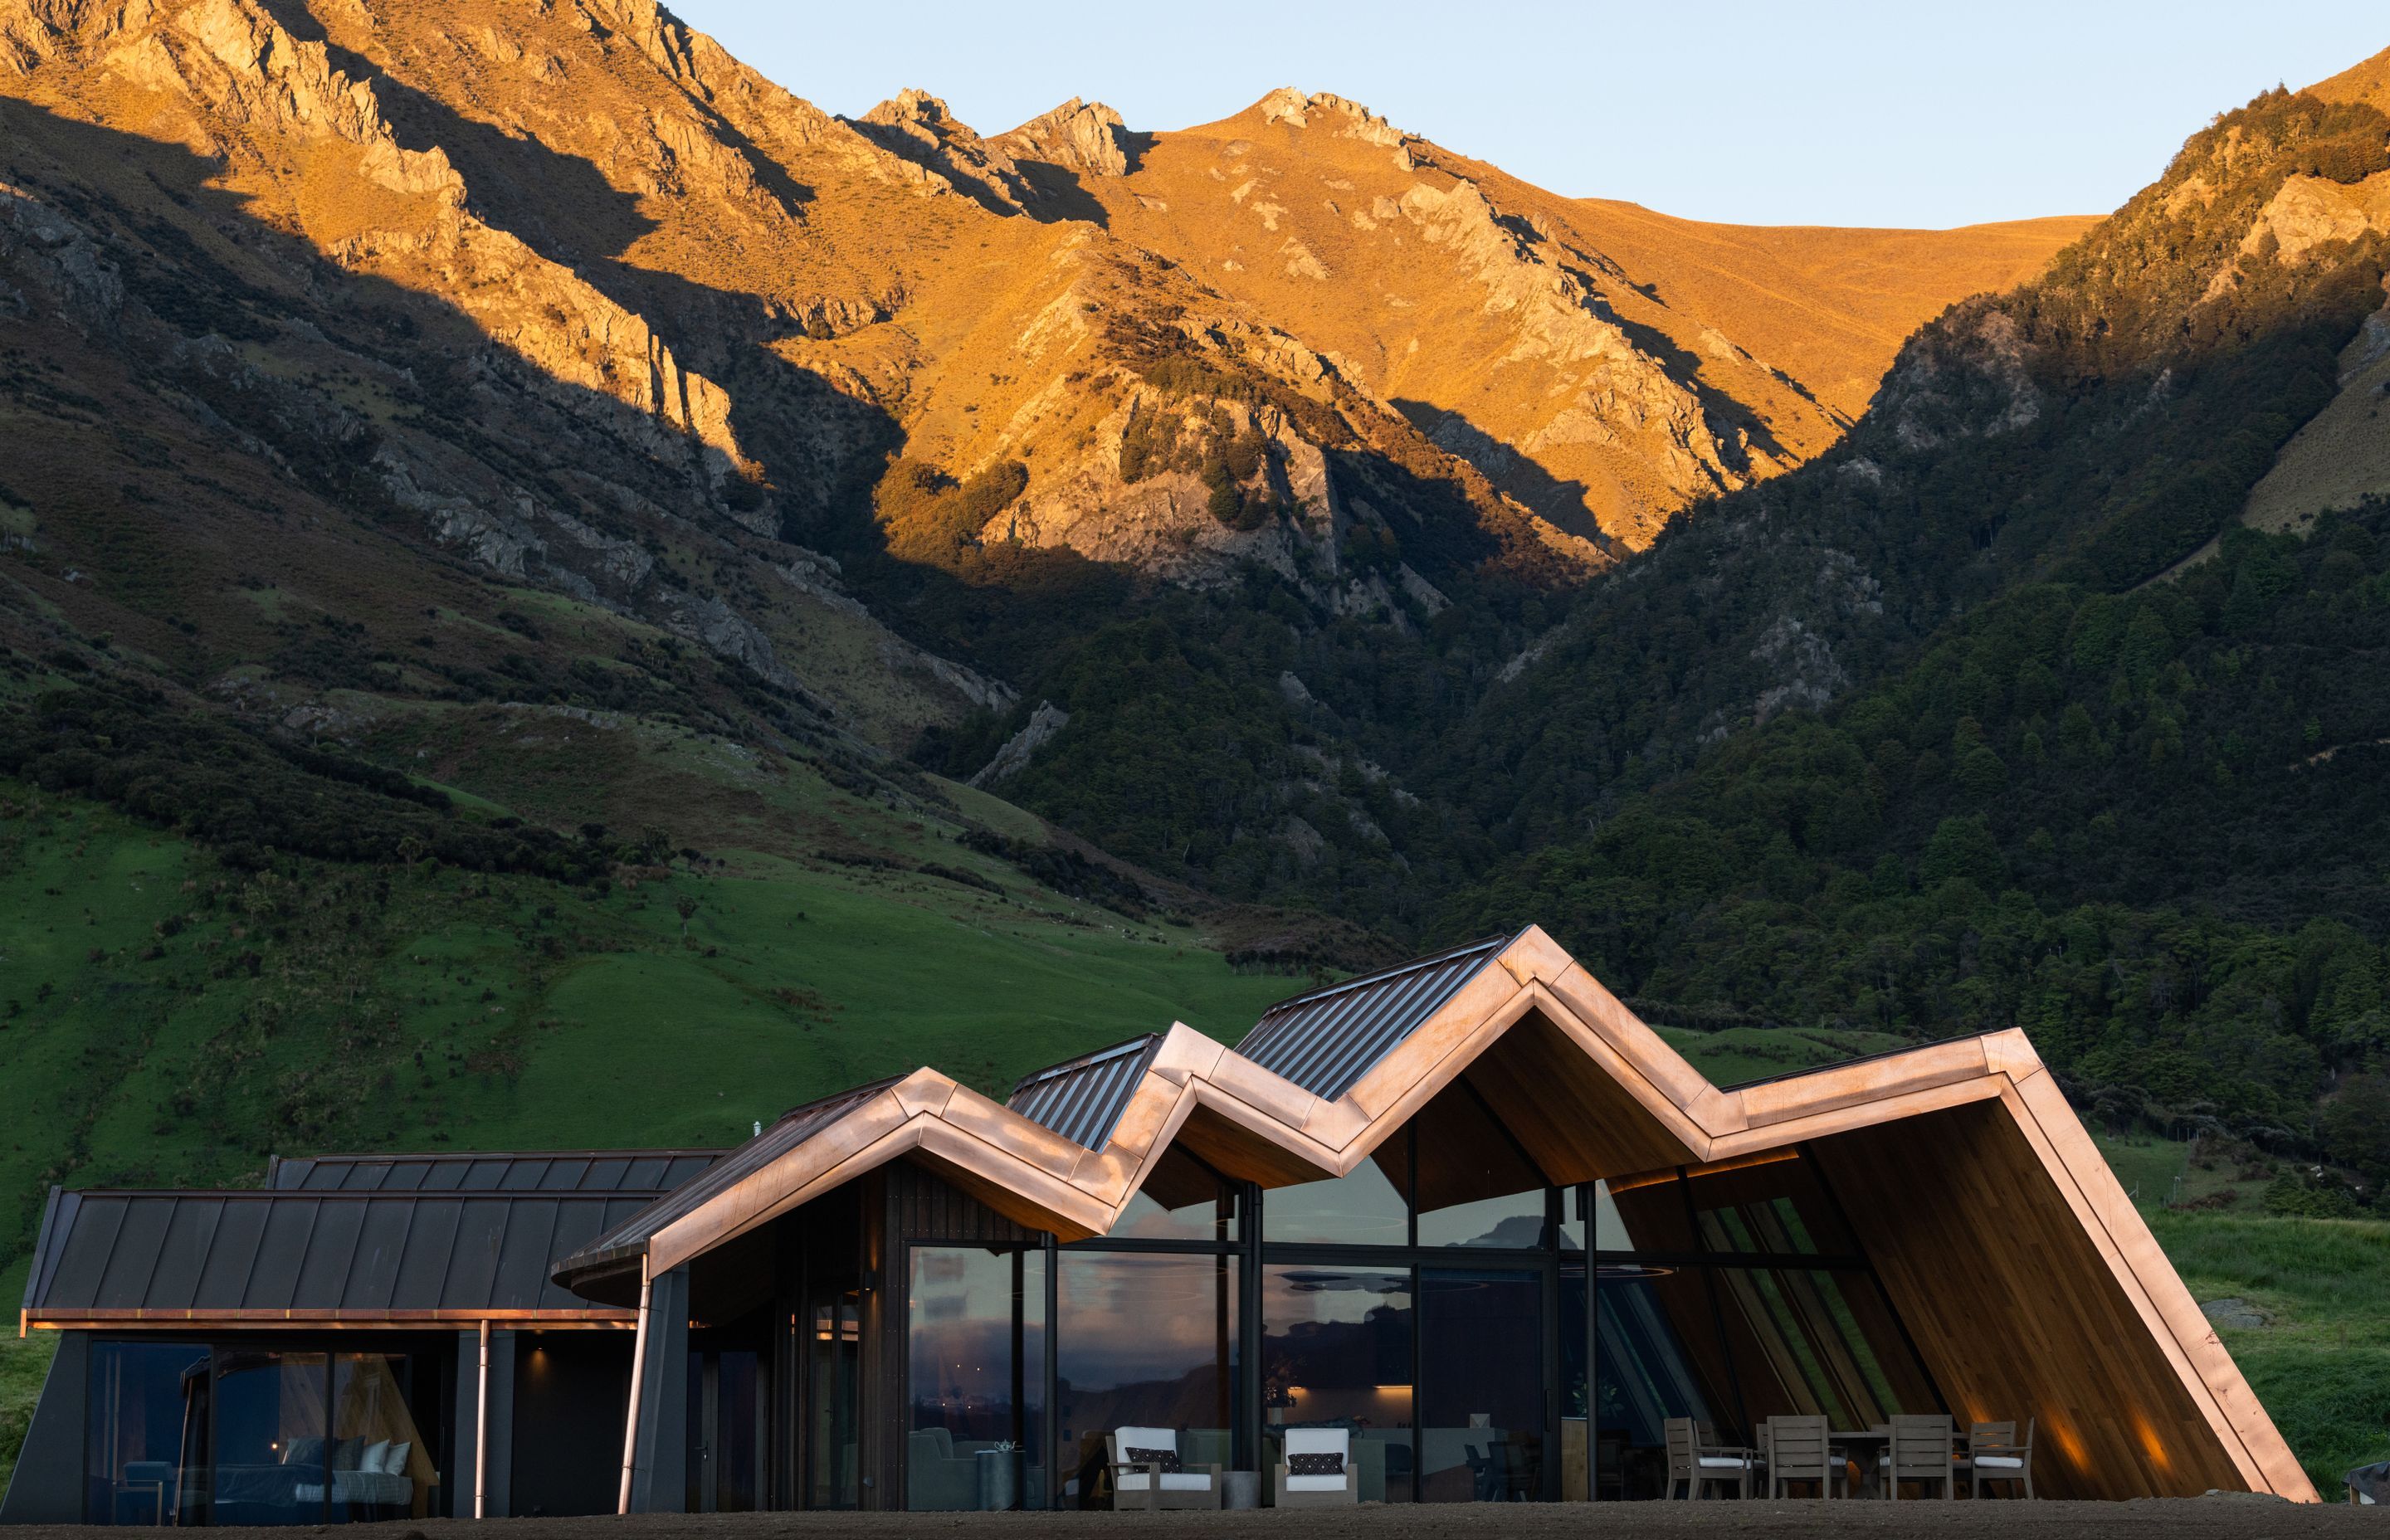 The design for the lodge was informed by a number of factors. First and foremost the surrounding mountain ranges.